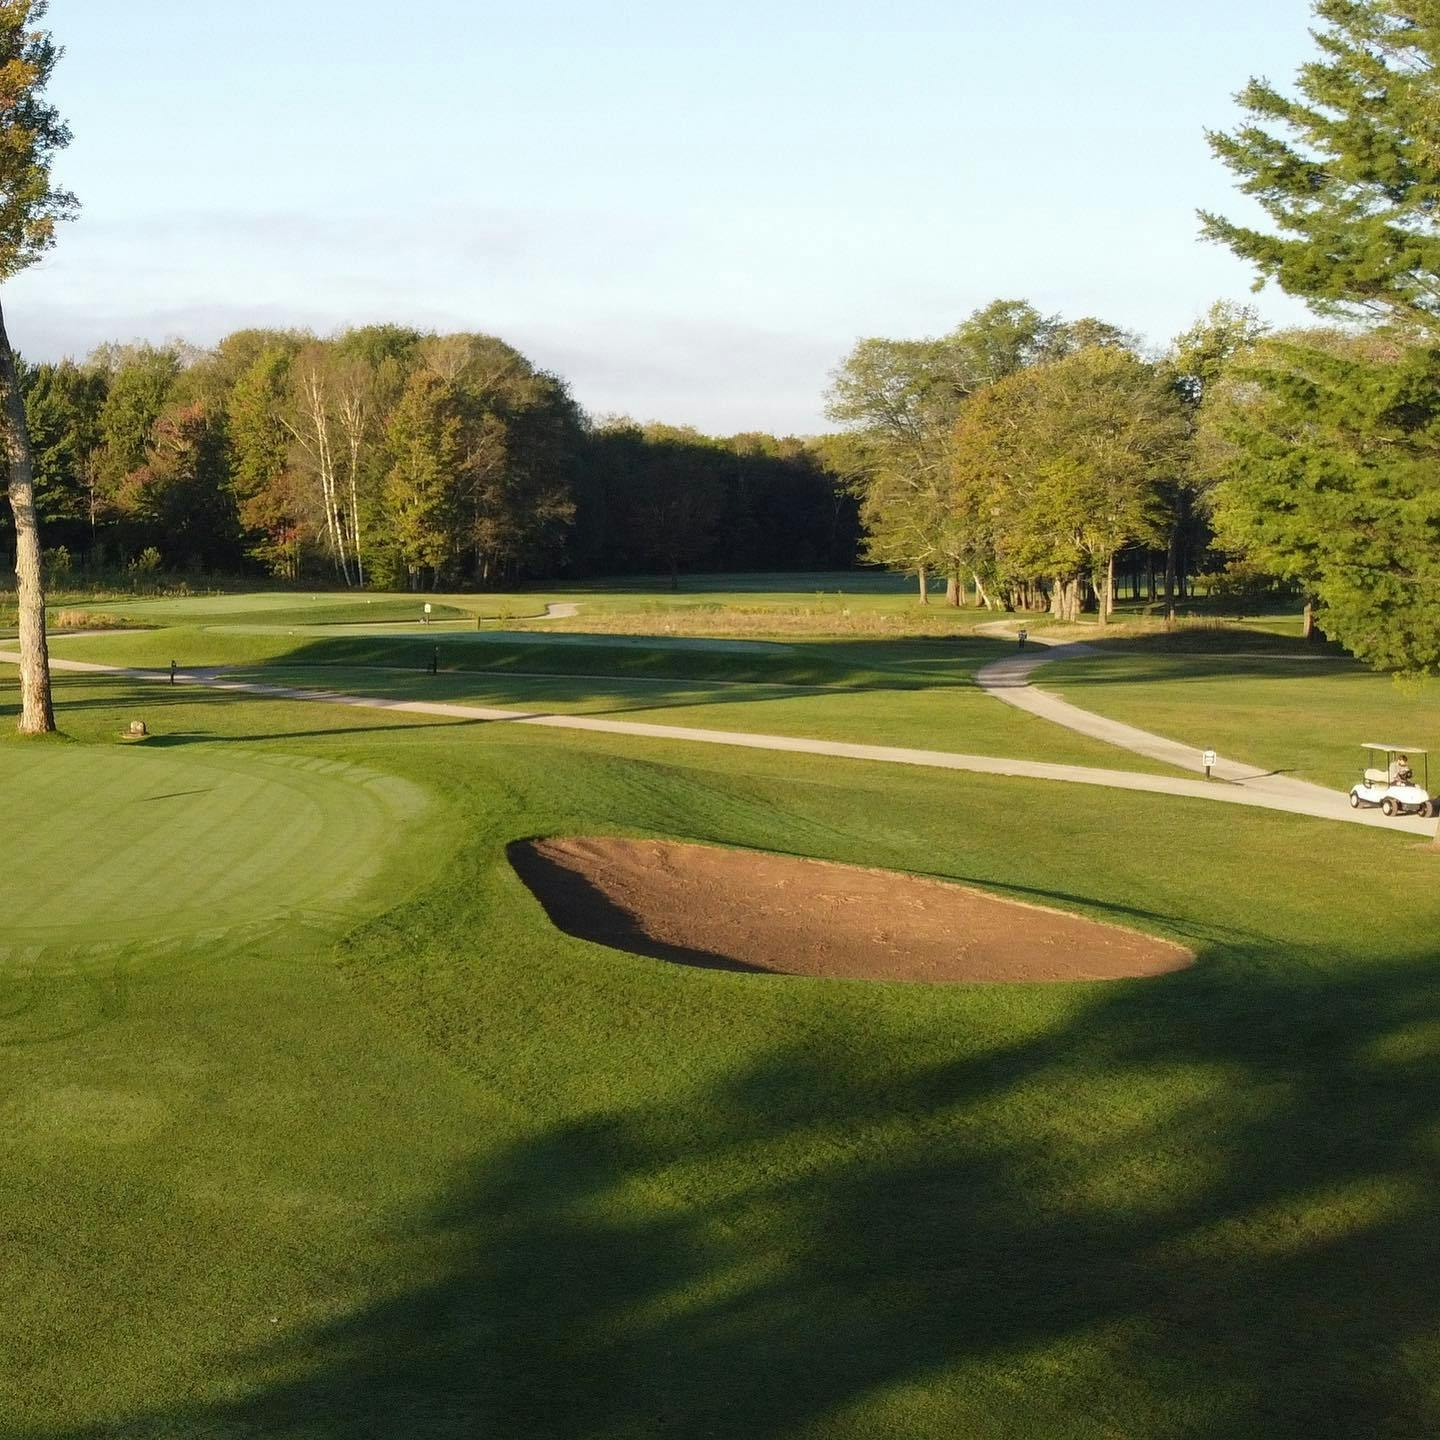 Originally beside the fairway bunker, 9 north green underwent a big move in 1968—125 yards back to its current spot. Kudos to architect Robbie Robinson for the new green, which was built as part of the south course construction. Pre-1968, it played as a 365-yard par 4 with a small square green. This hole was actually our opening hole for the first two years while the clubhouse was being built in the early 1950s. The original clubhouse was a small log cabin beside the yellow tees on 9. #LSGHistory #PlayTheLake